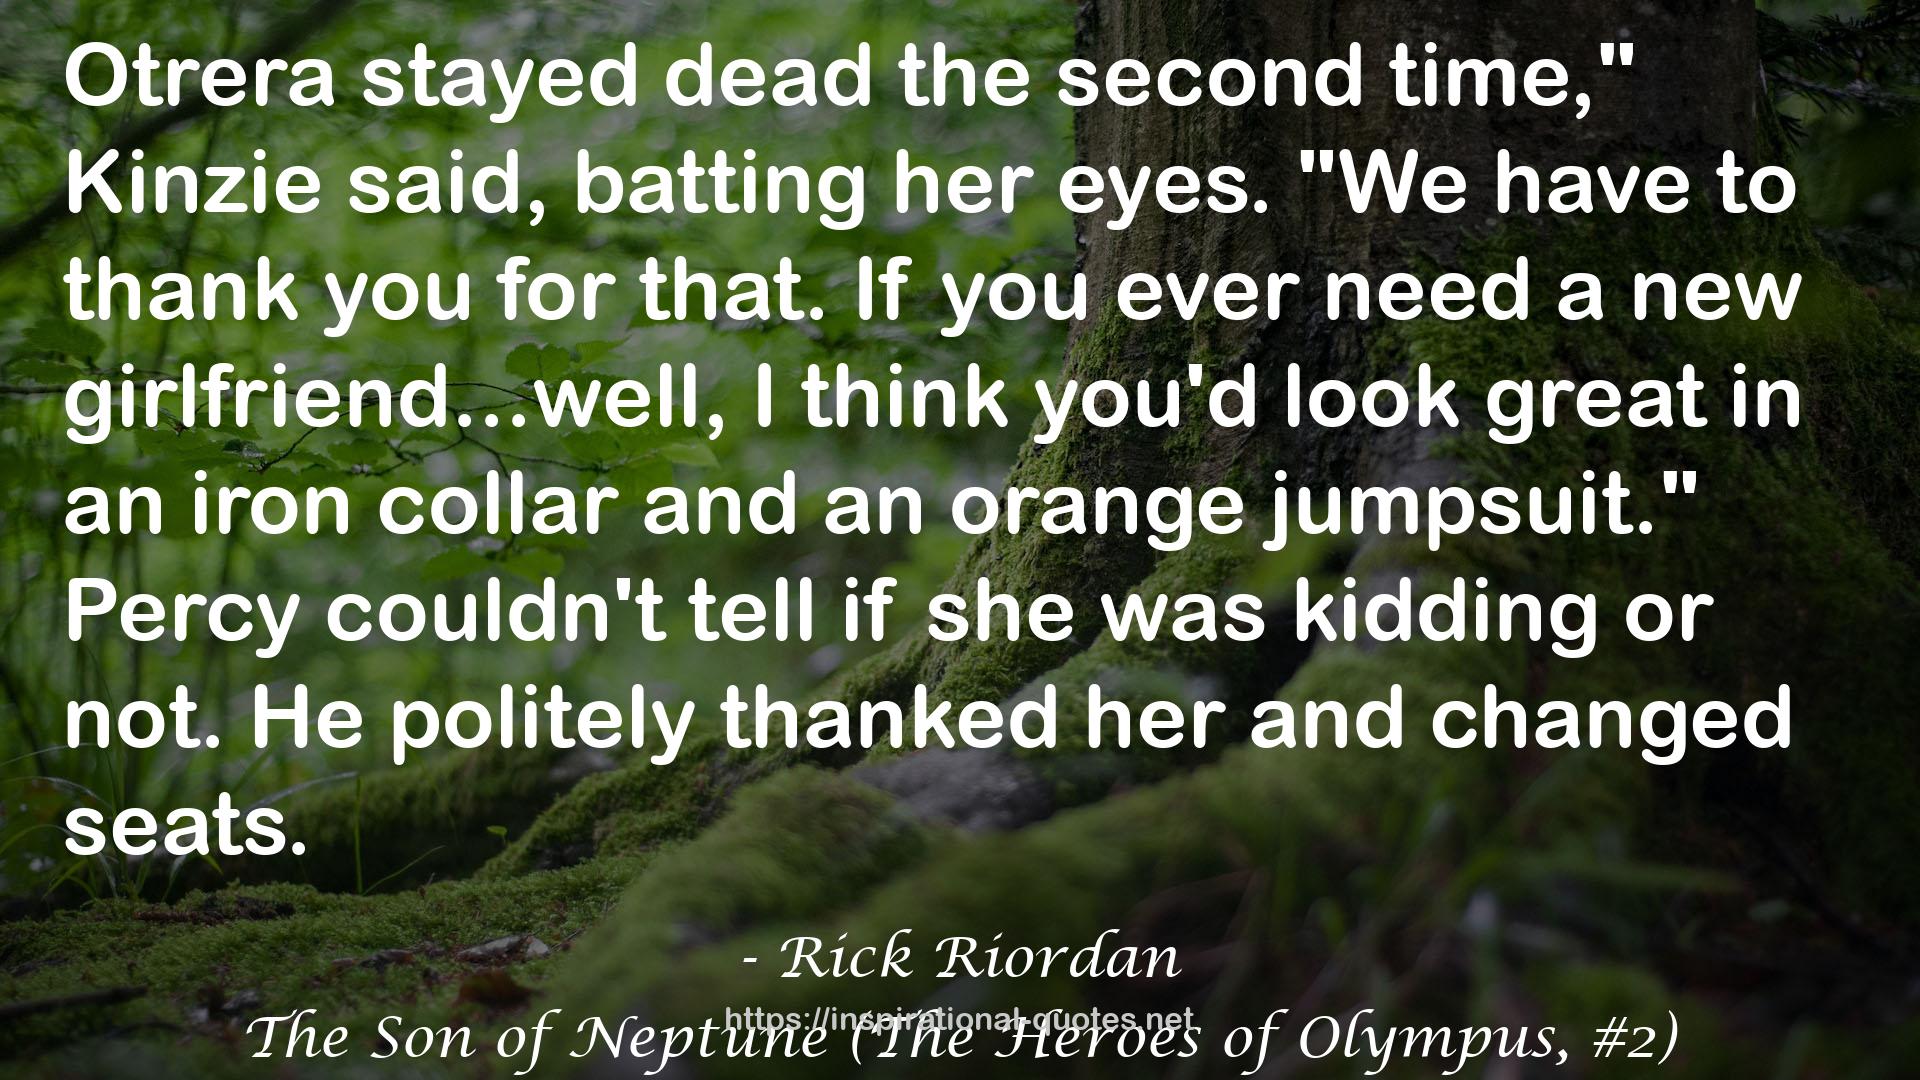 The Son of Neptune (The Heroes of Olympus, #2) QUOTES